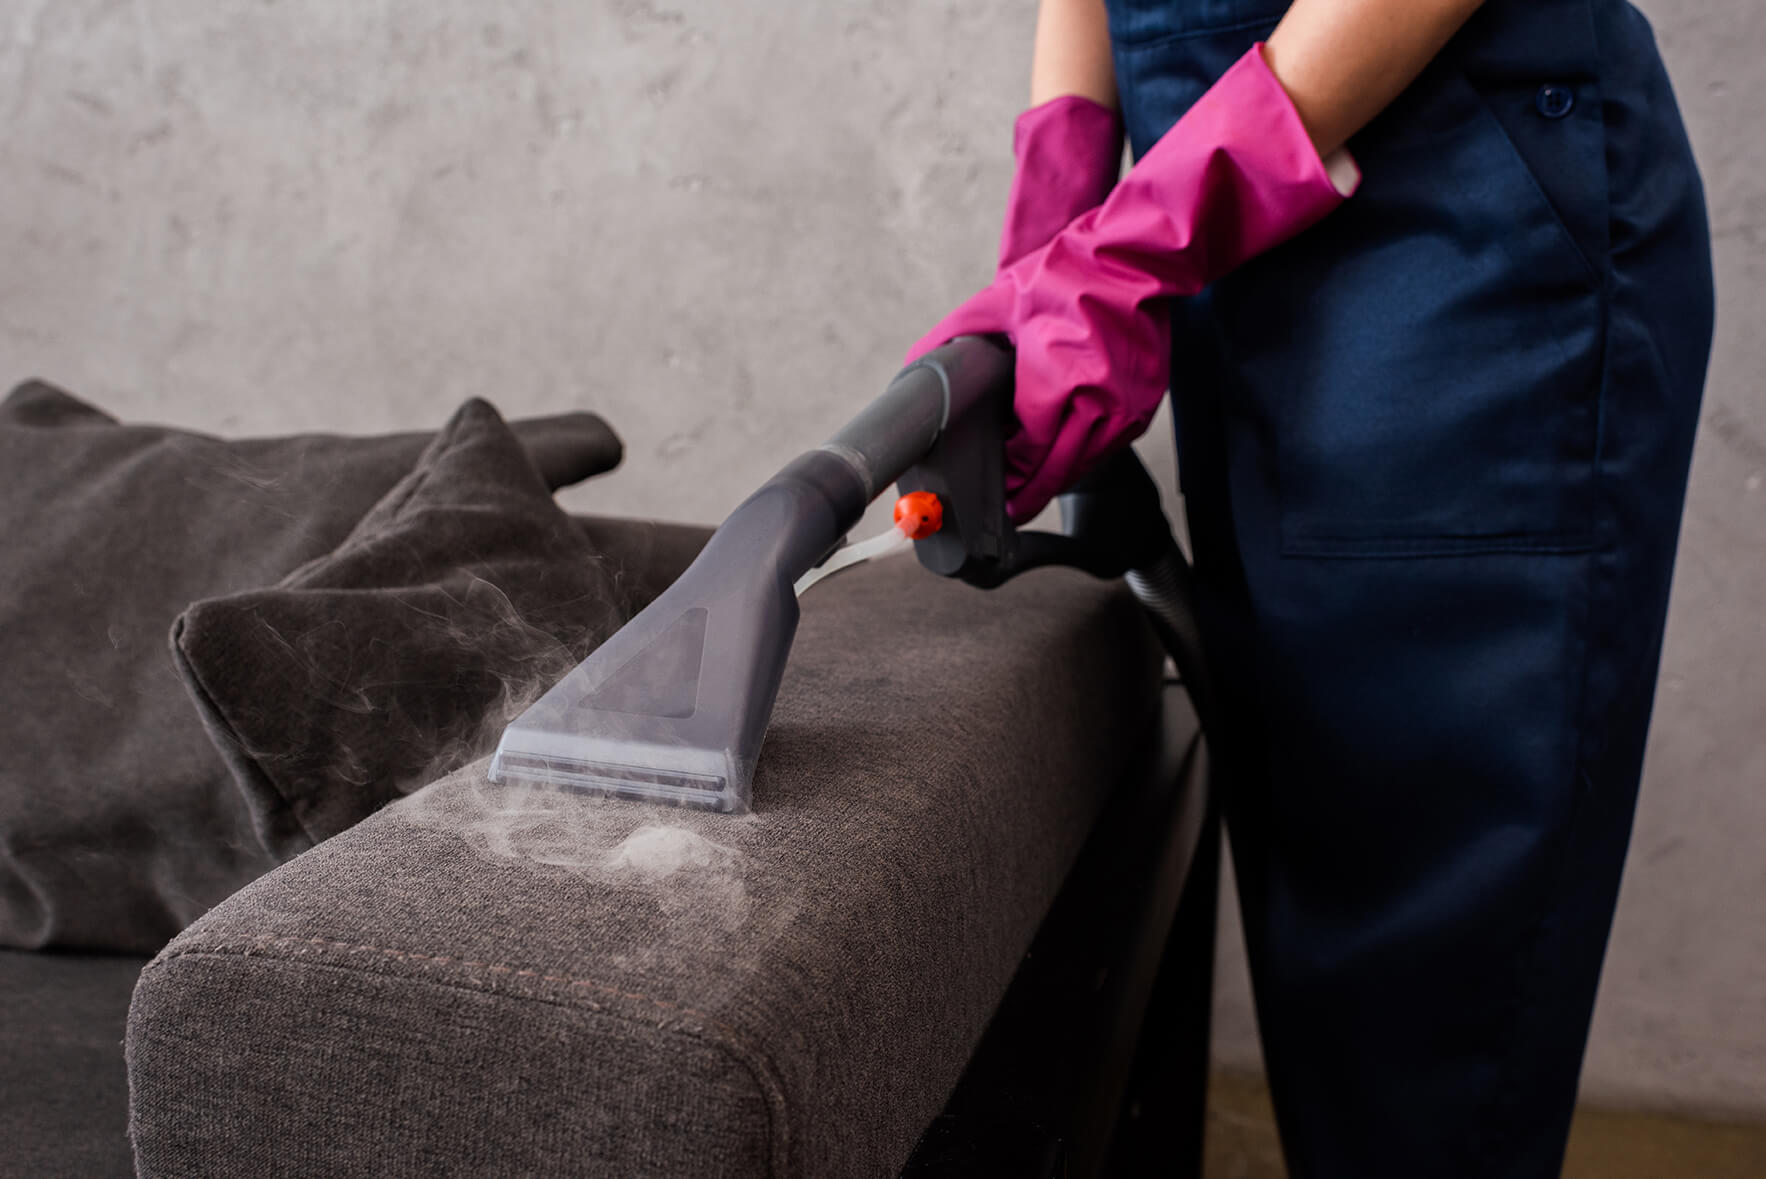 A technician with rubber gloves steam cleaning upholstery of a couch